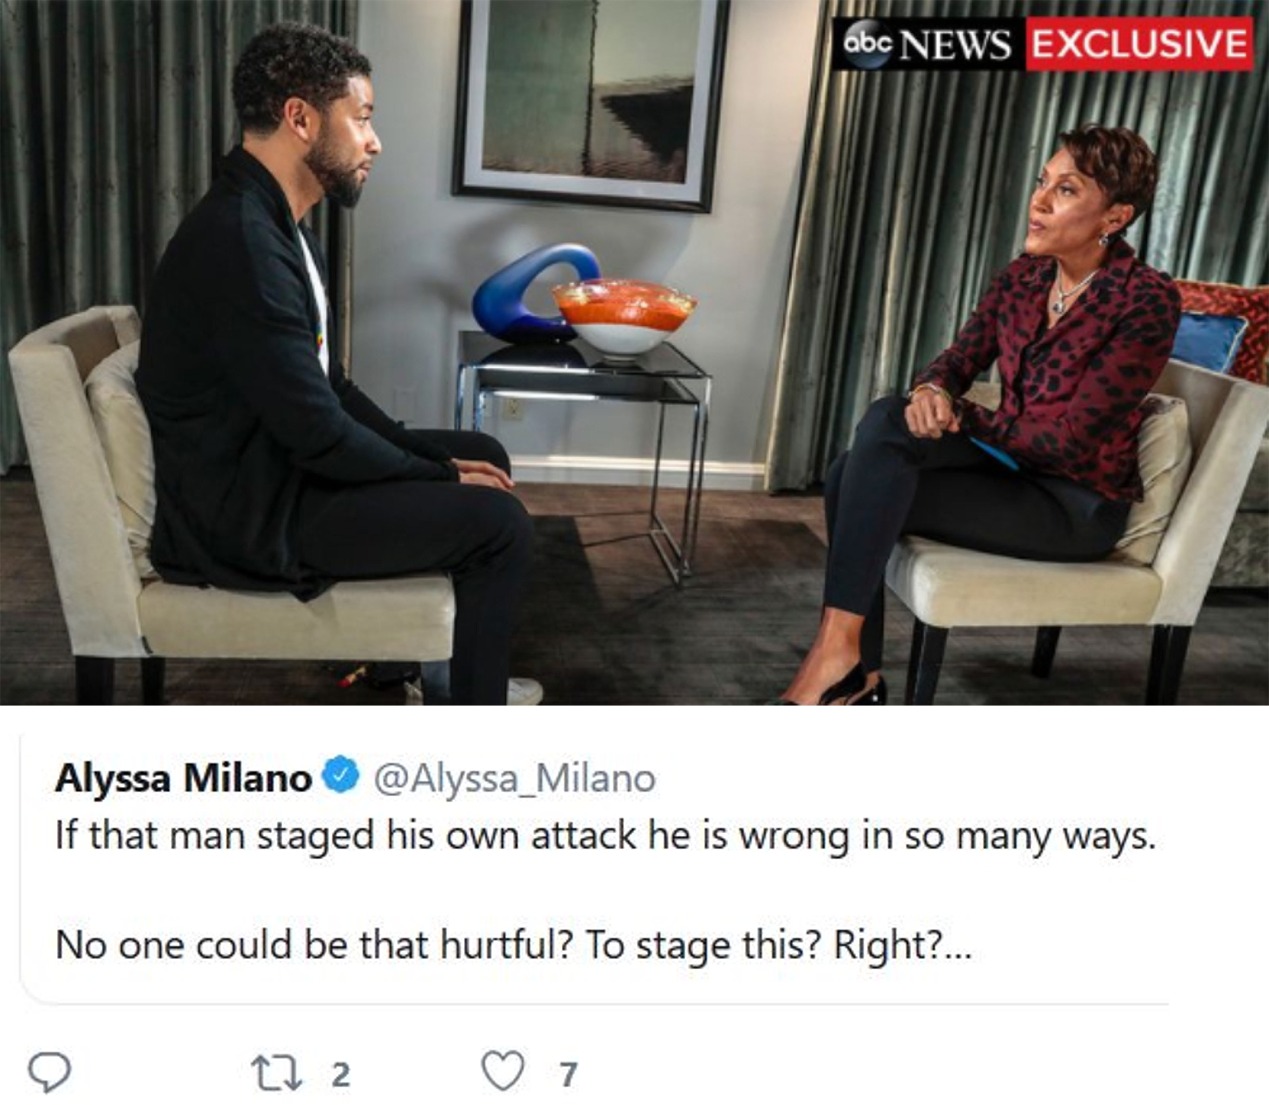 jussie smollett memes - jussie smollett robin roberts interview - abc News Exclusive Alyssa Milano If that man staged his own attack he is wrong in so many ways. No one could be that hurtful? To stage this? Right?... O 2 z